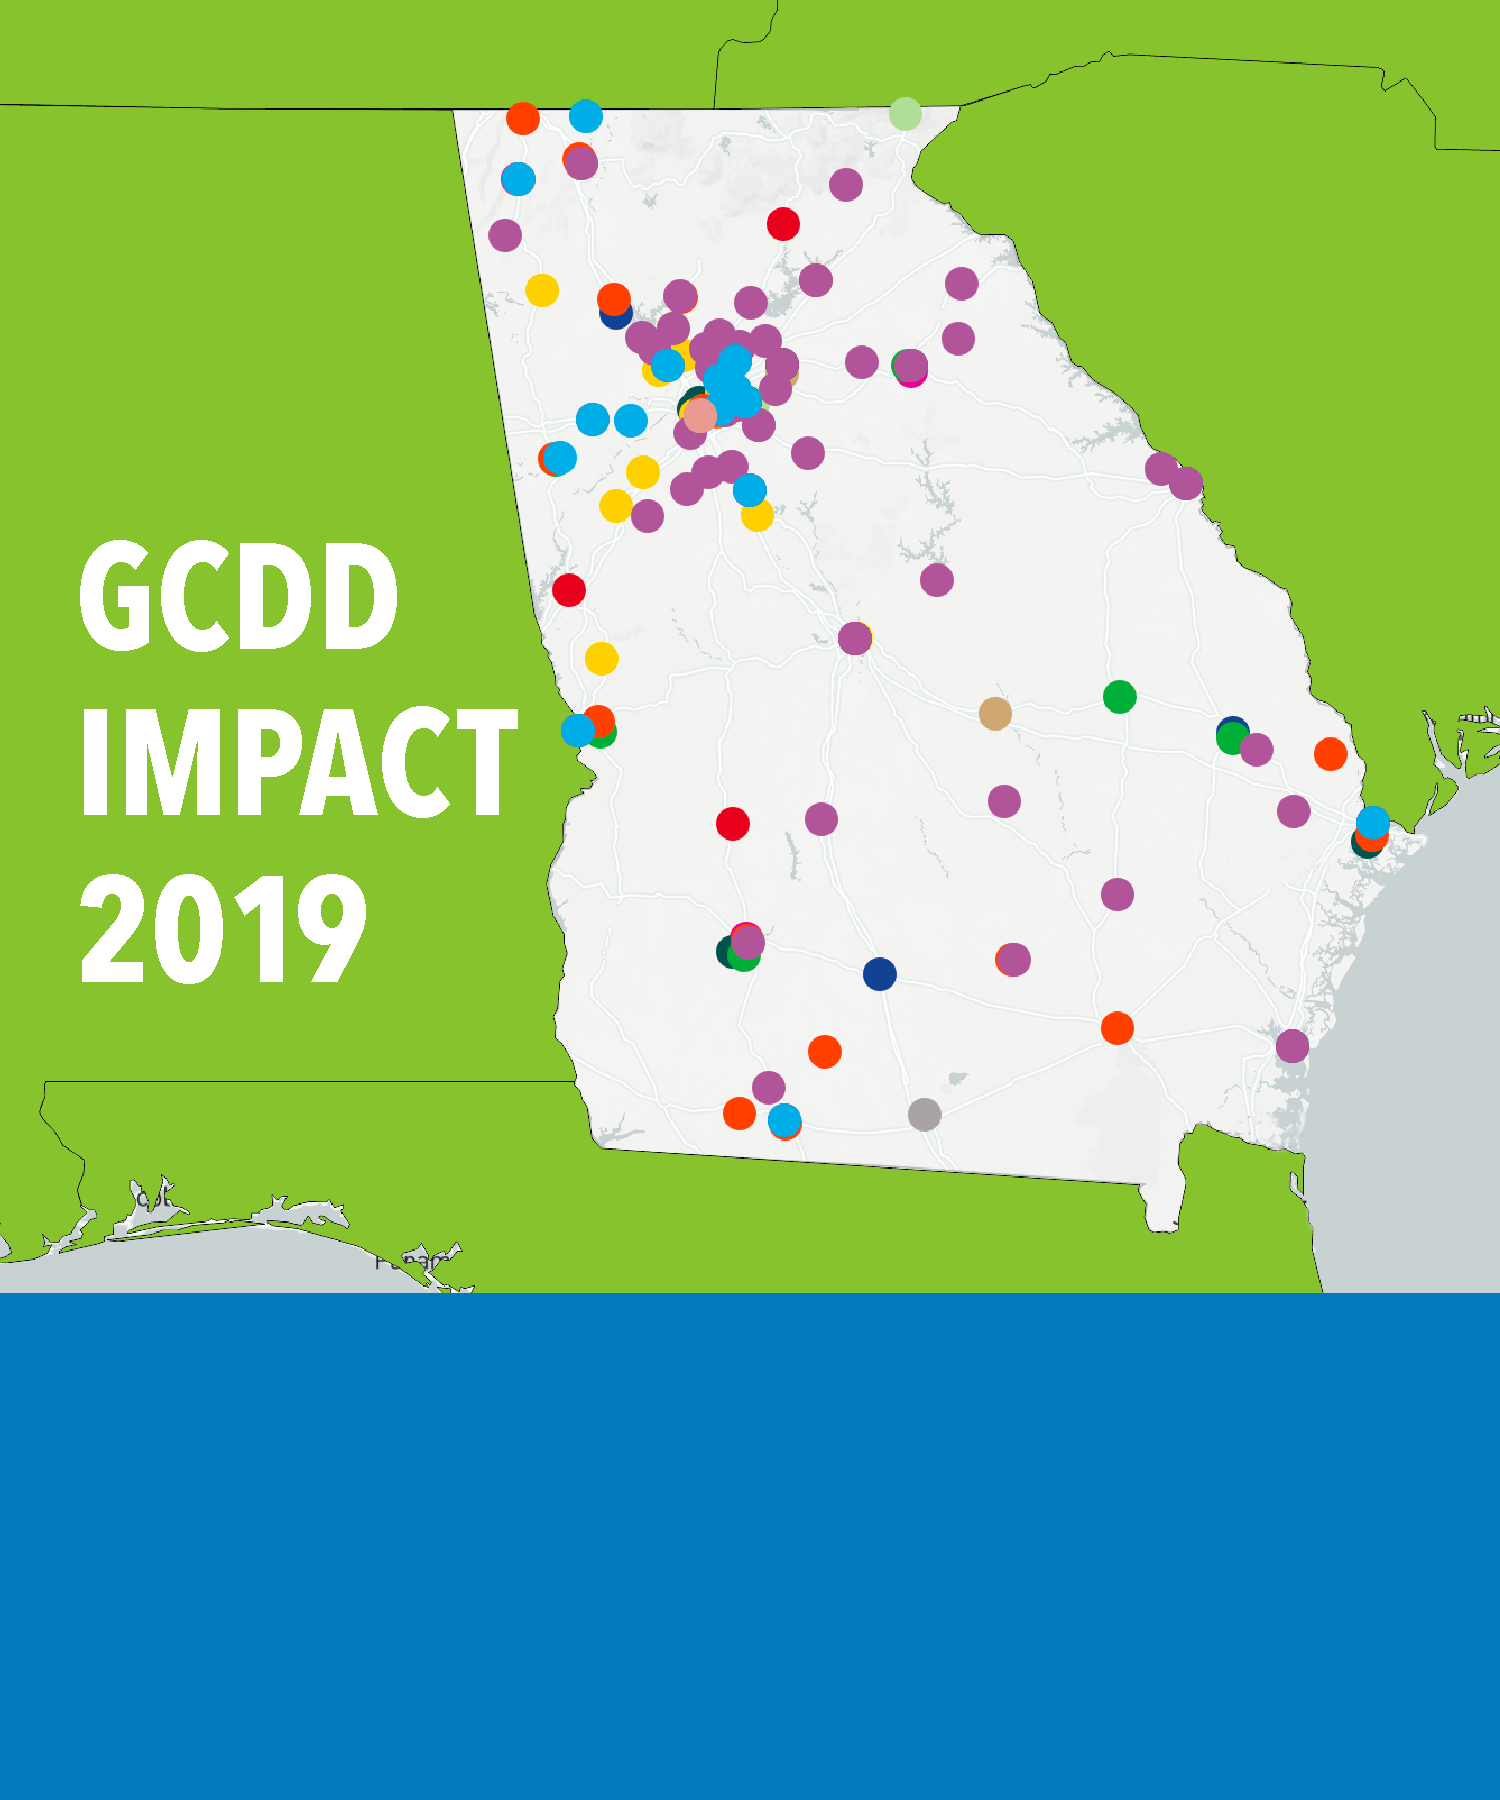 In 2019, GCDD continued to impact the State of Georgia in ways that benefit everyone. Initiatives included advocacy trainings to community building to educational programs.Check out our interactive map to see the locations of these initiatives, which GCDD supported through targeted funding and strategic collaboration.